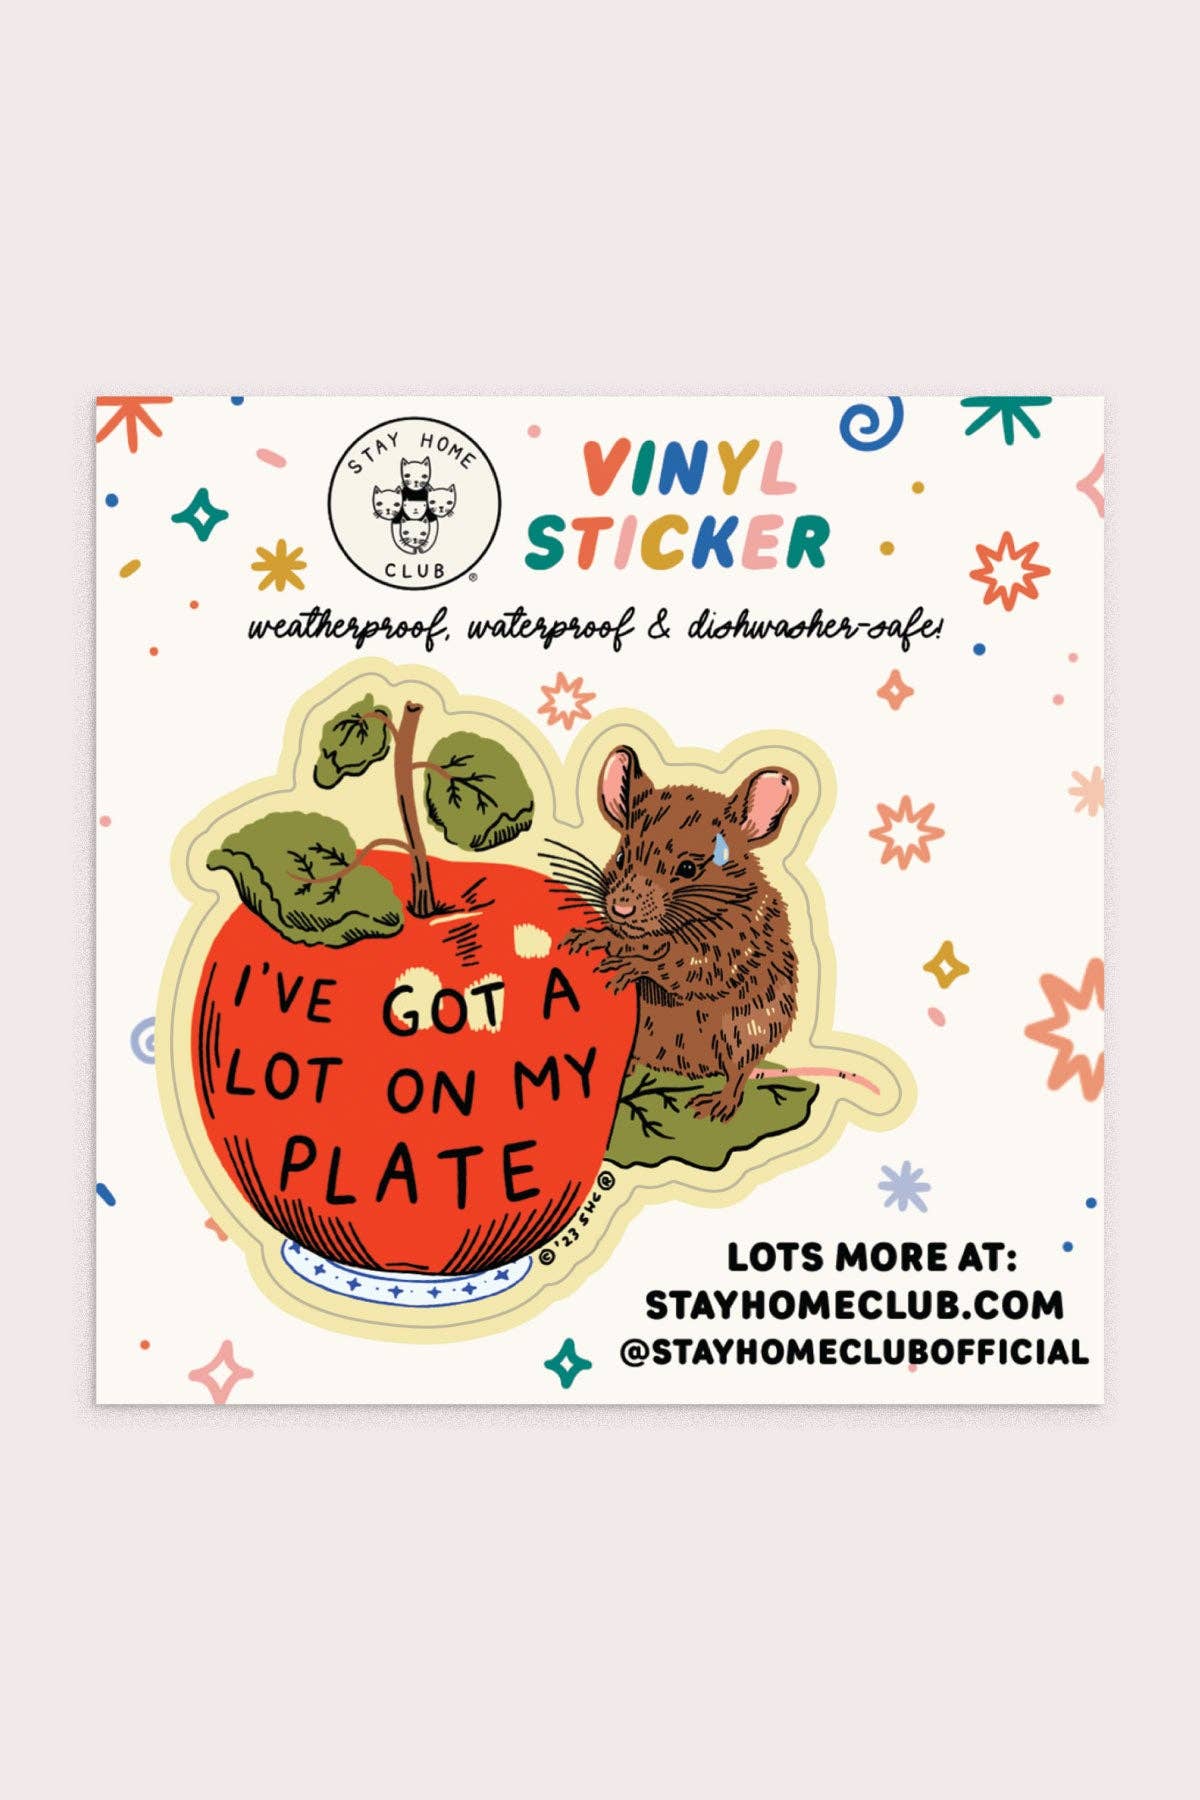 A Lot On My Plate Vinyl Sticker - Out of the Blue